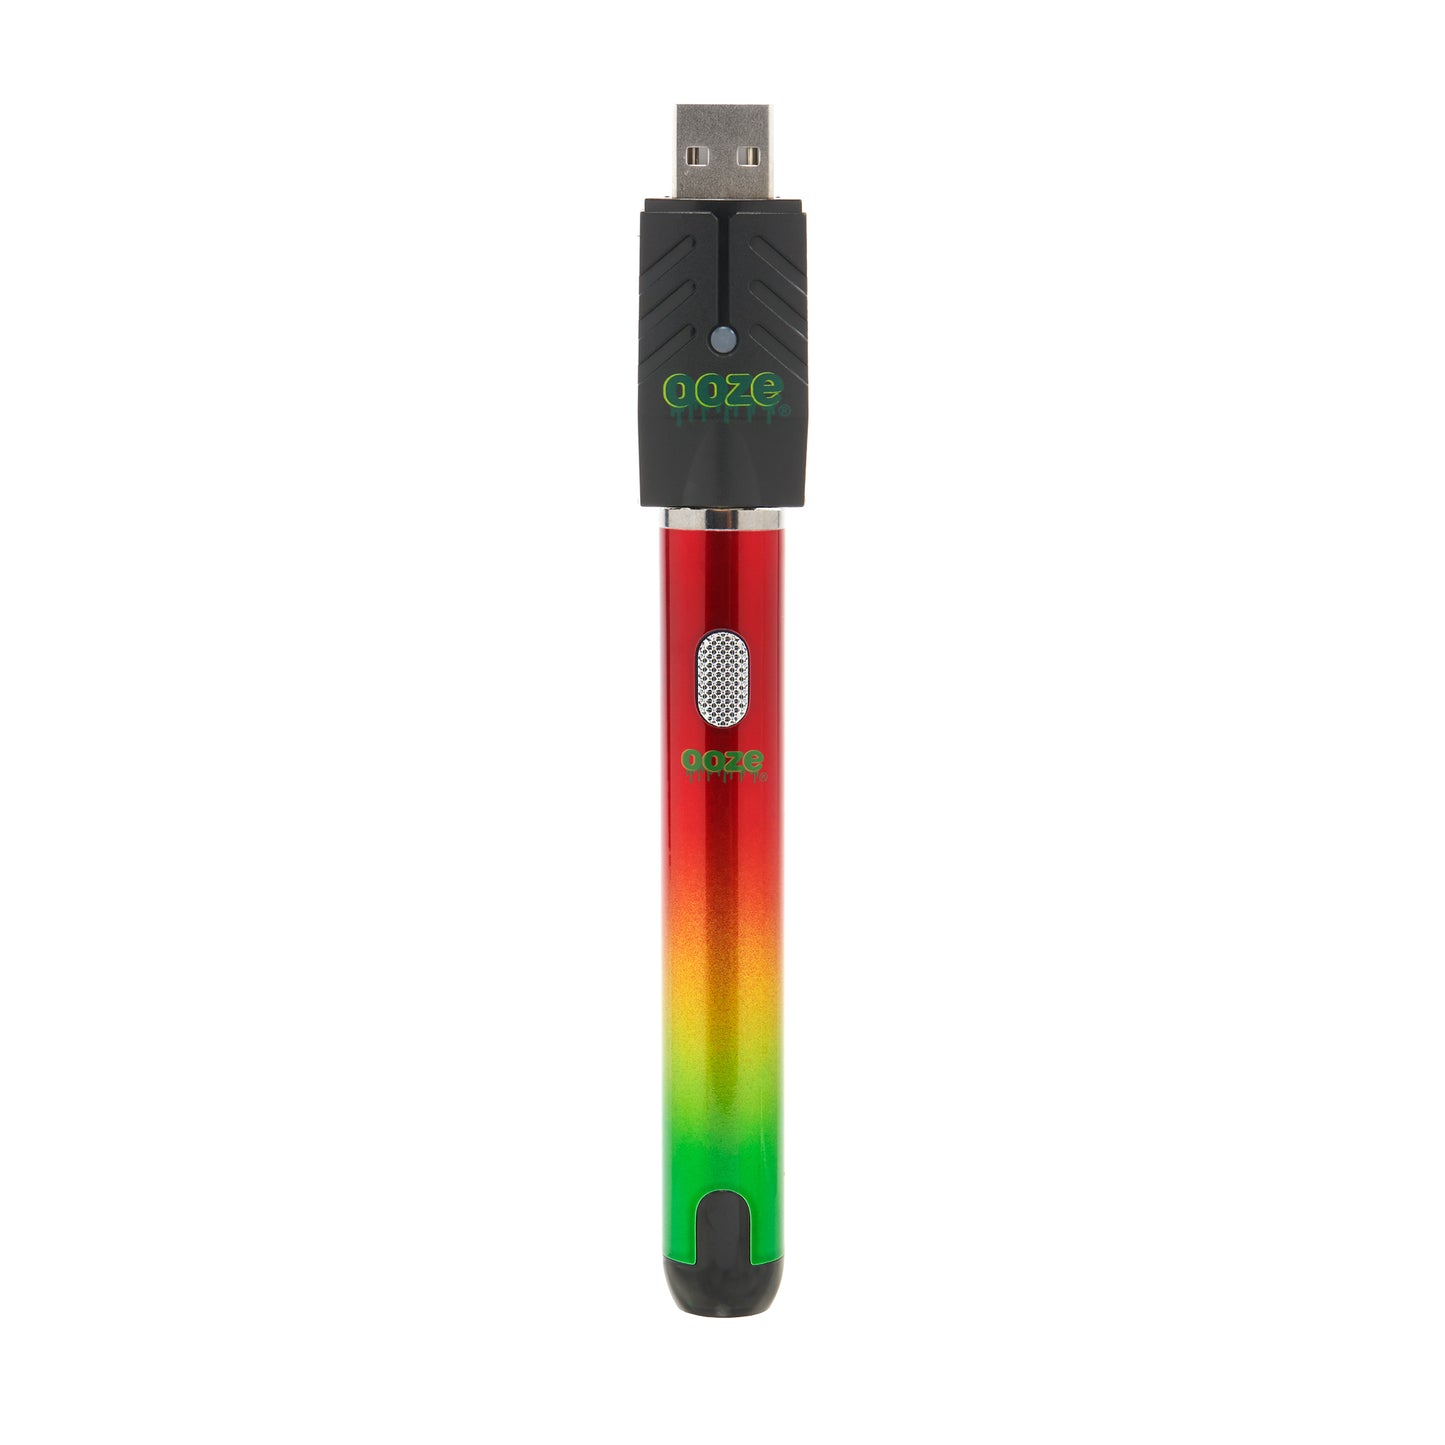 The rasta Ooze Smart Battery is upright with the charger attached